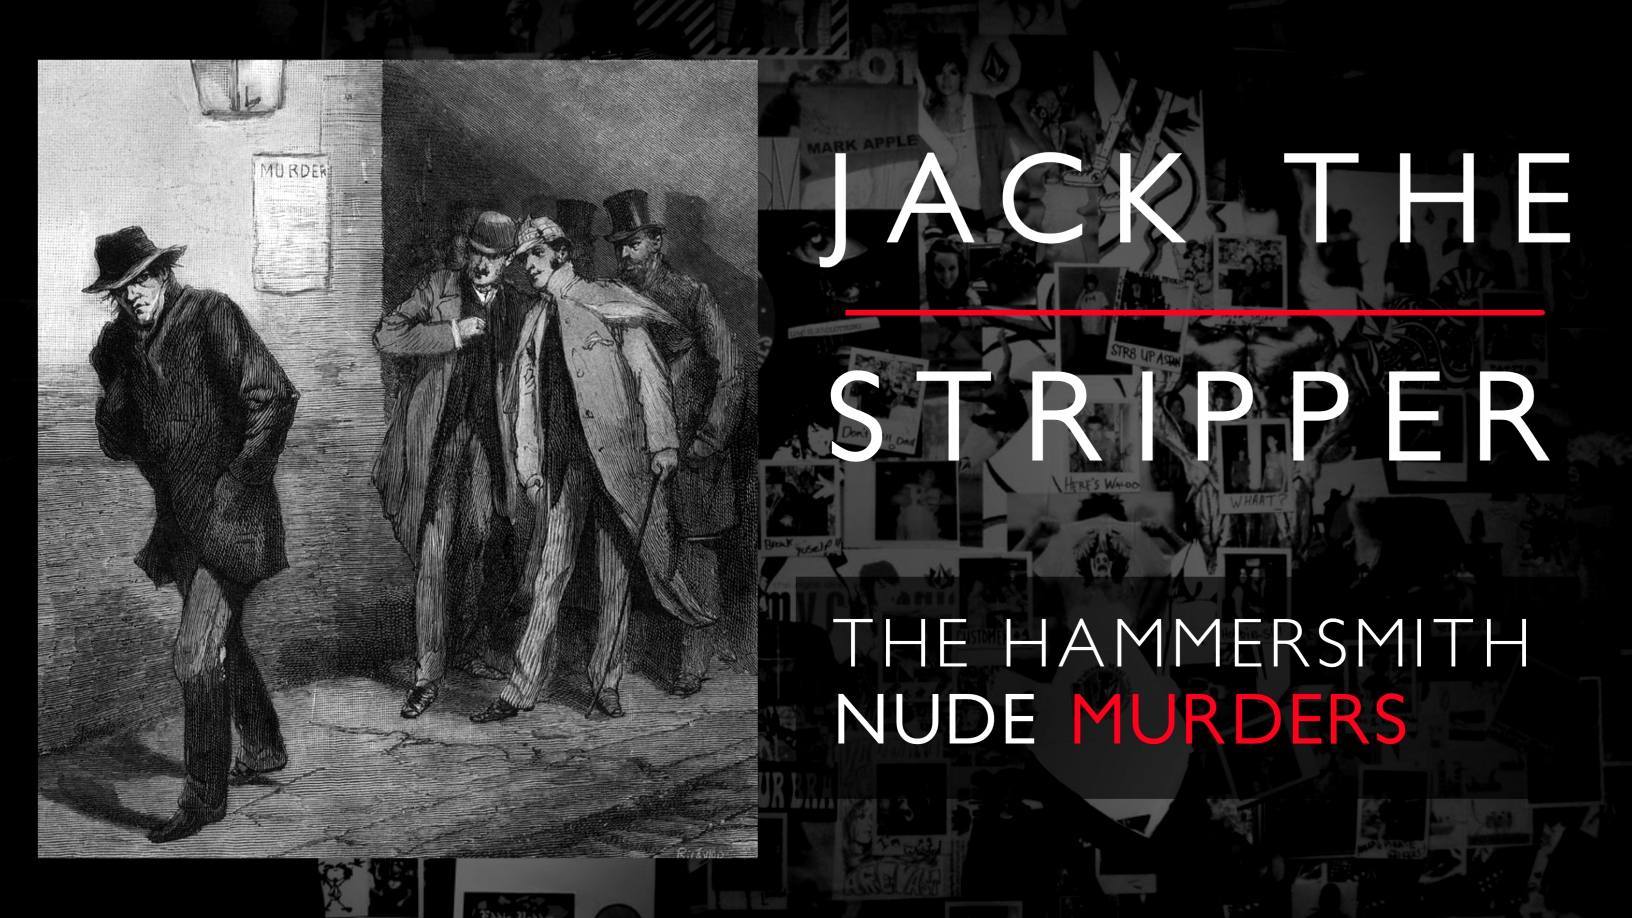 The Hammersmith Nude Murders: Qui était Jack the Stripper? 1